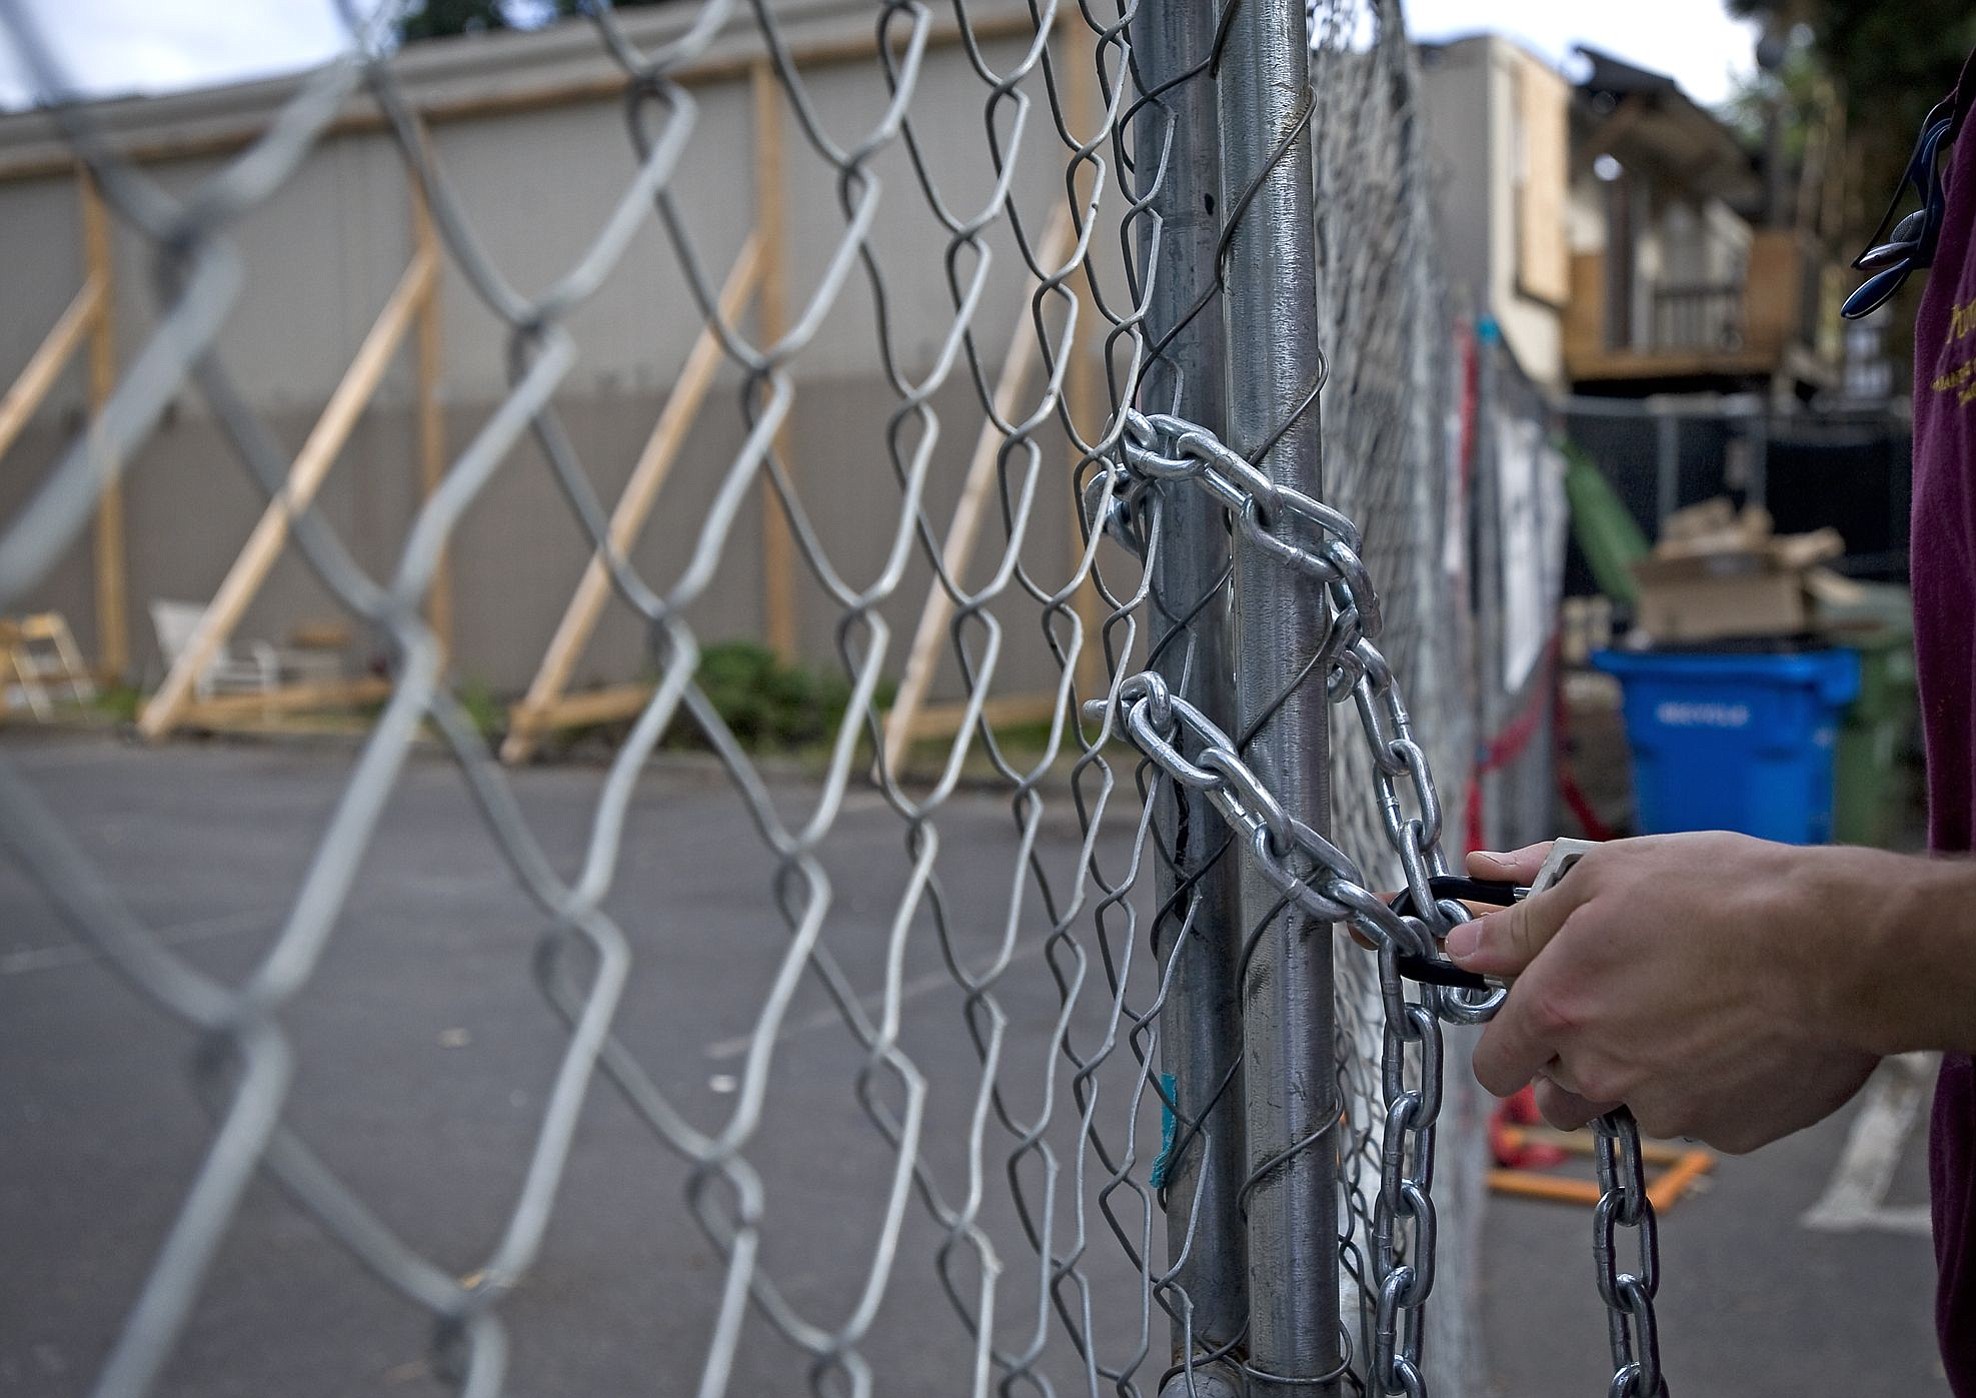 Jacob Dye, a technician assistant with PuroClean Portland, locks up a gate for the day at Rolling Creek Apartments.